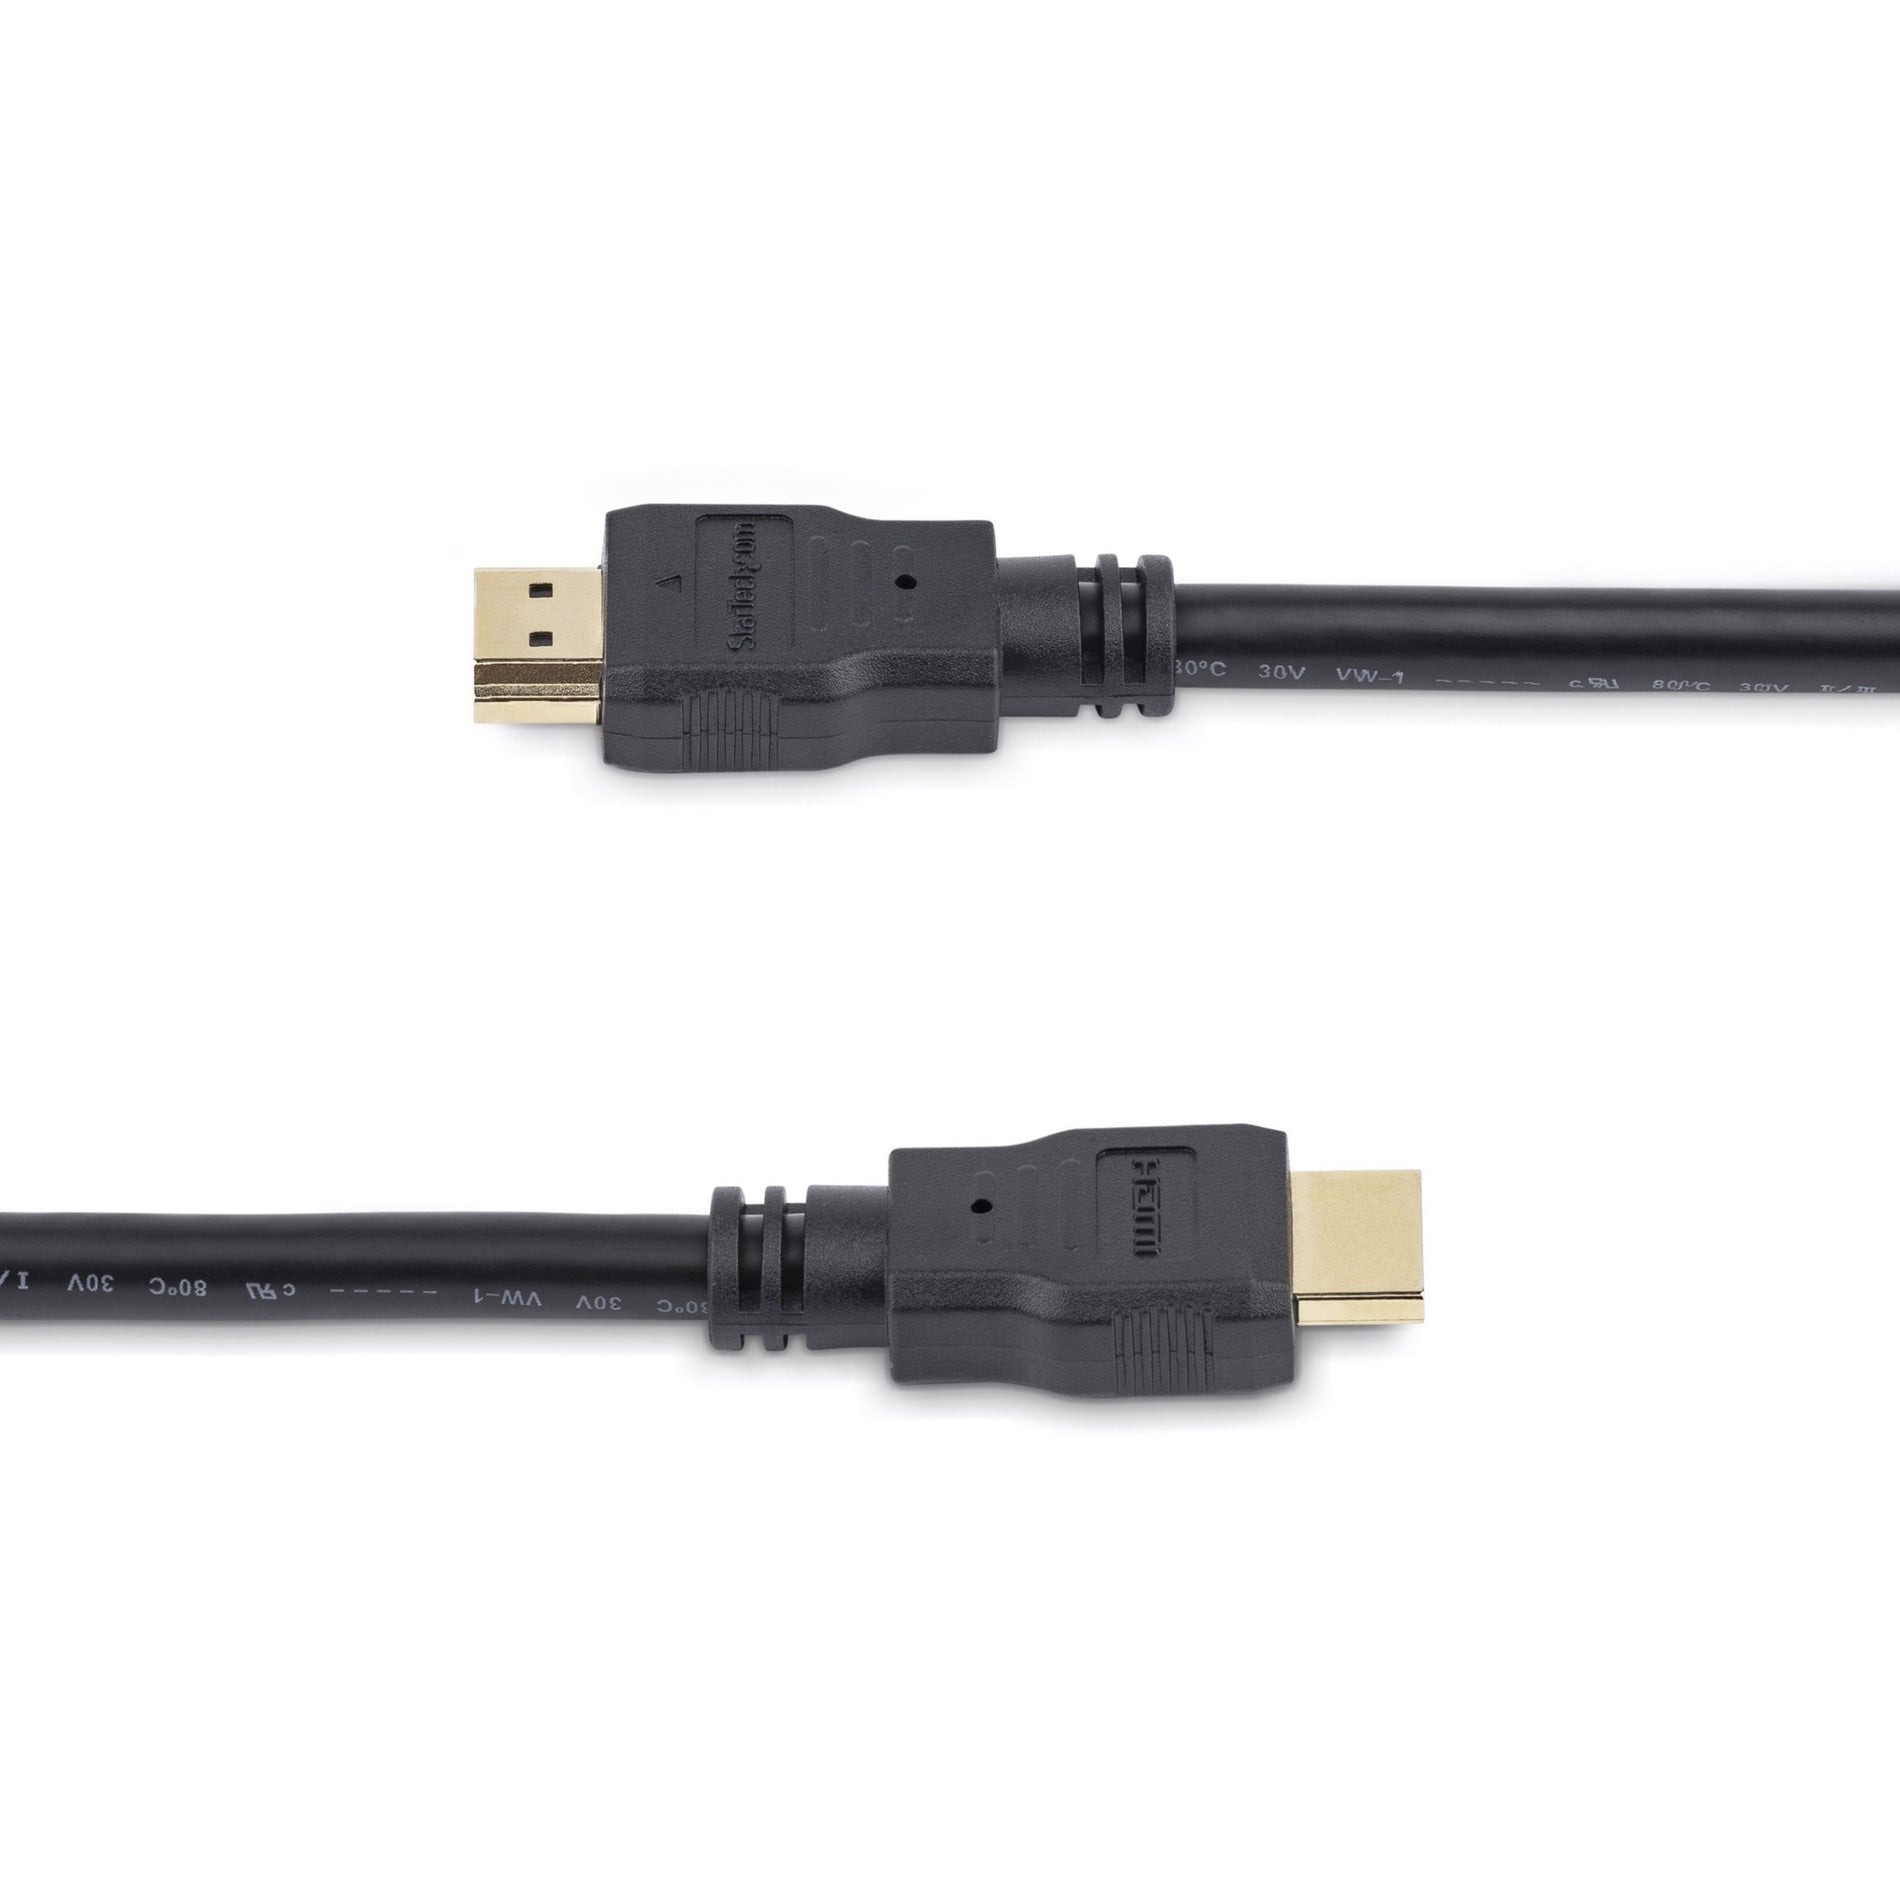 StarTech.com HDMM3 3 ft High Speed HDMI Cable - Ultra HD 4k x 2k HDMI Cable, Molded, Strain Relief, Corrosion-free, Gold Plated Connectors